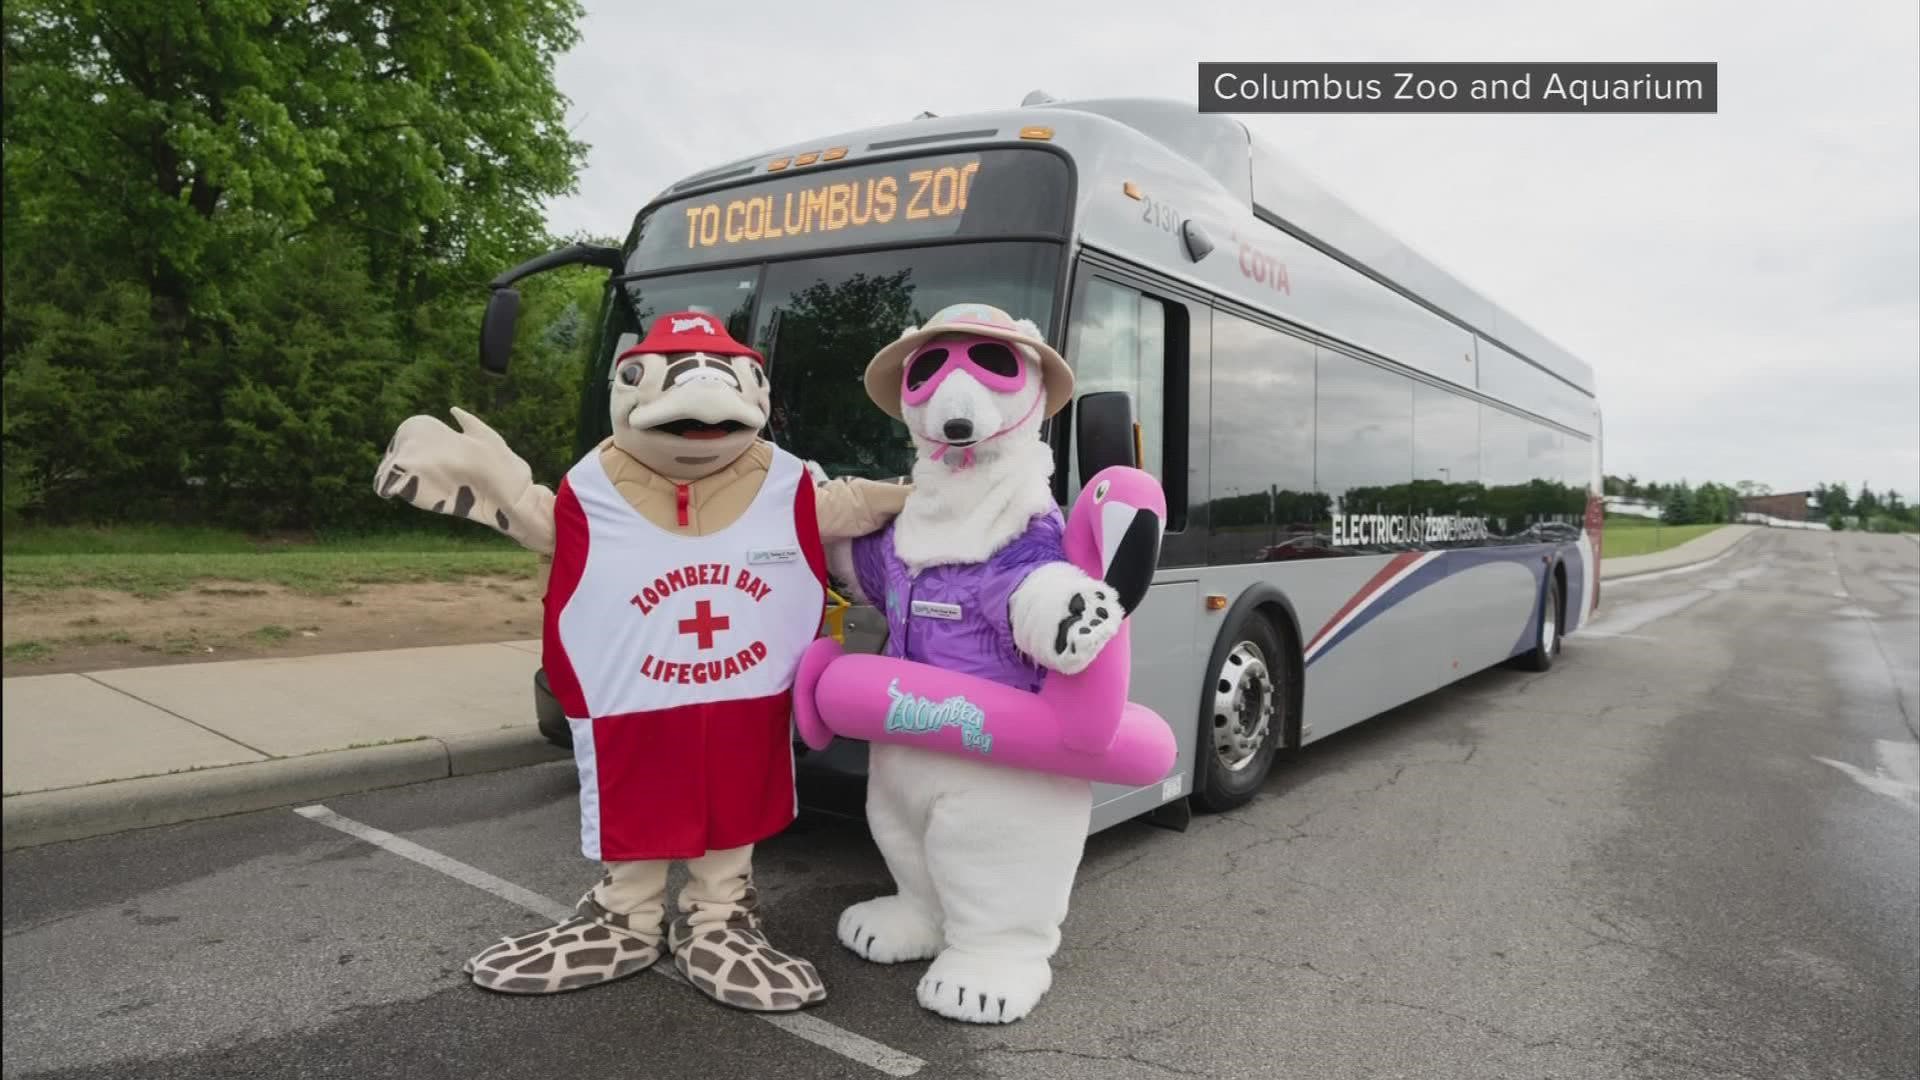 Zoo Bus returns for the summer season this Memorial Day weekend, COTA announced Thursday.